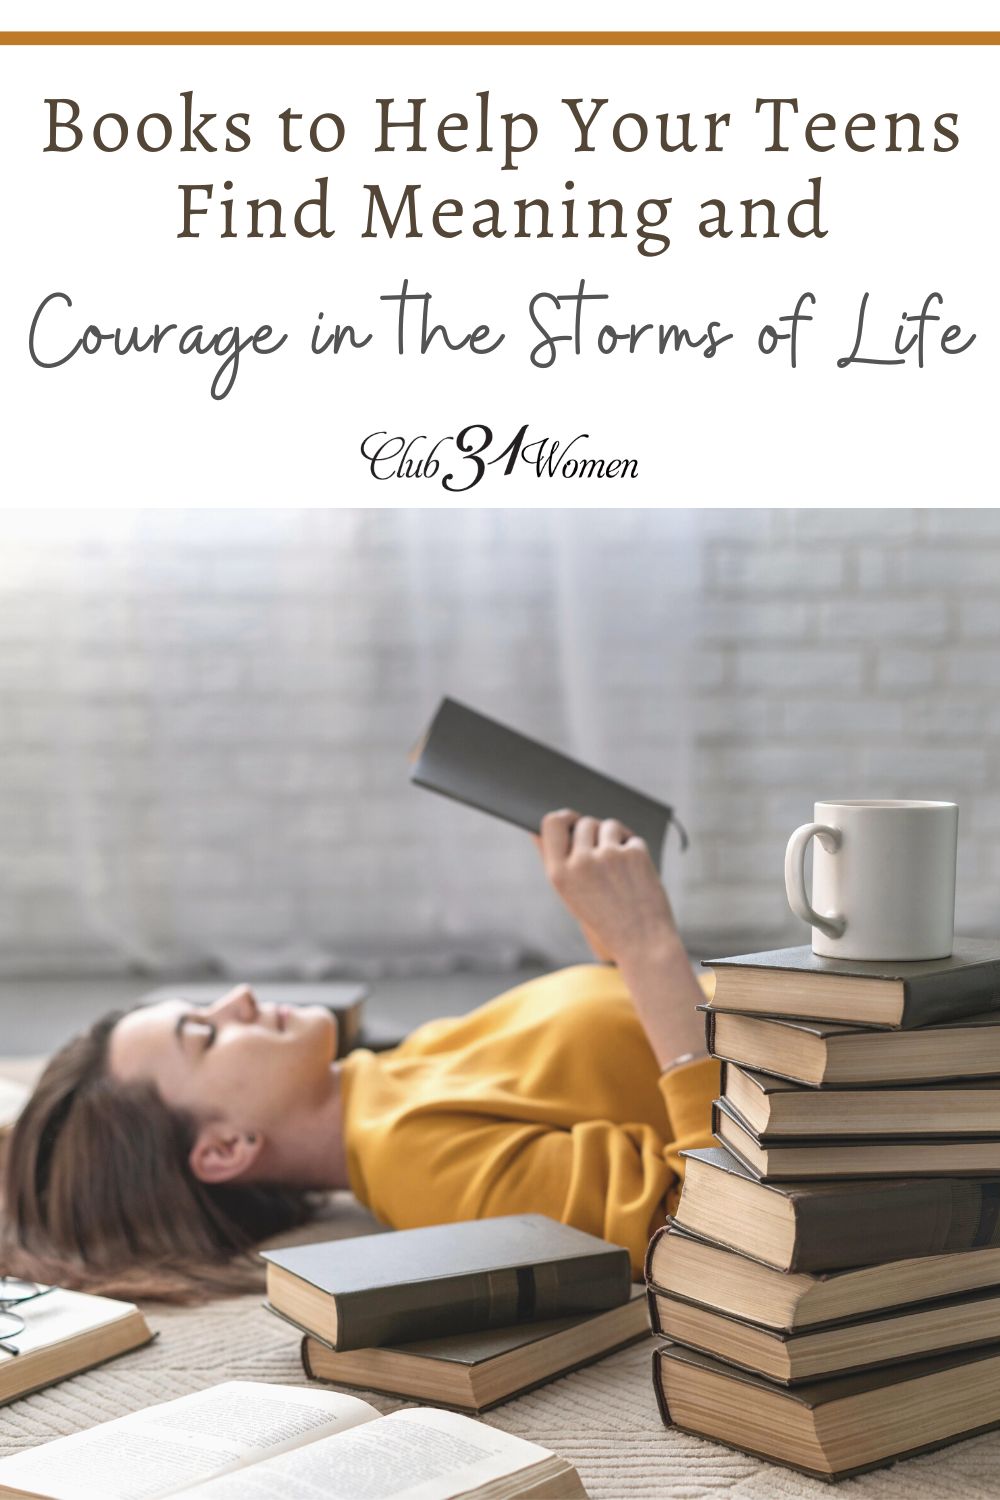 What books can you offer to help your teens find meaning when the storms of life come pounding down on them? via @Club31Women